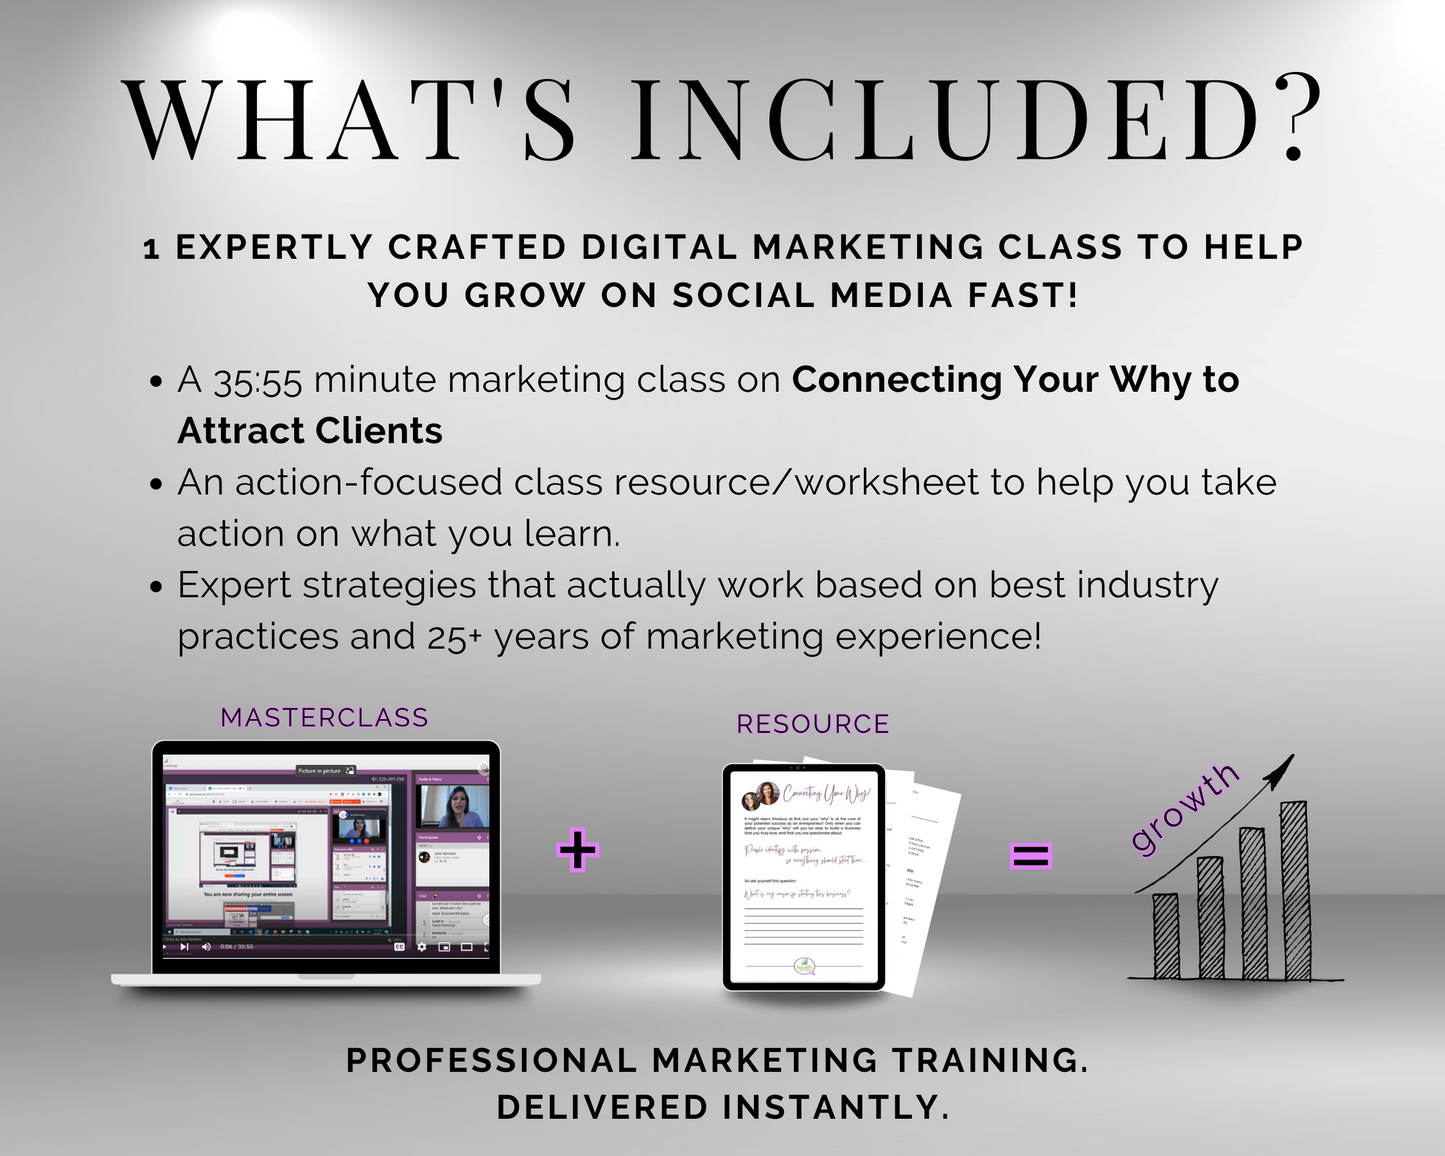 What's included in the TAT - Connecting Your Why to Attract Clients Masterclass by Get Socially Inclined? The product description is missing. Could you please provide the product description?